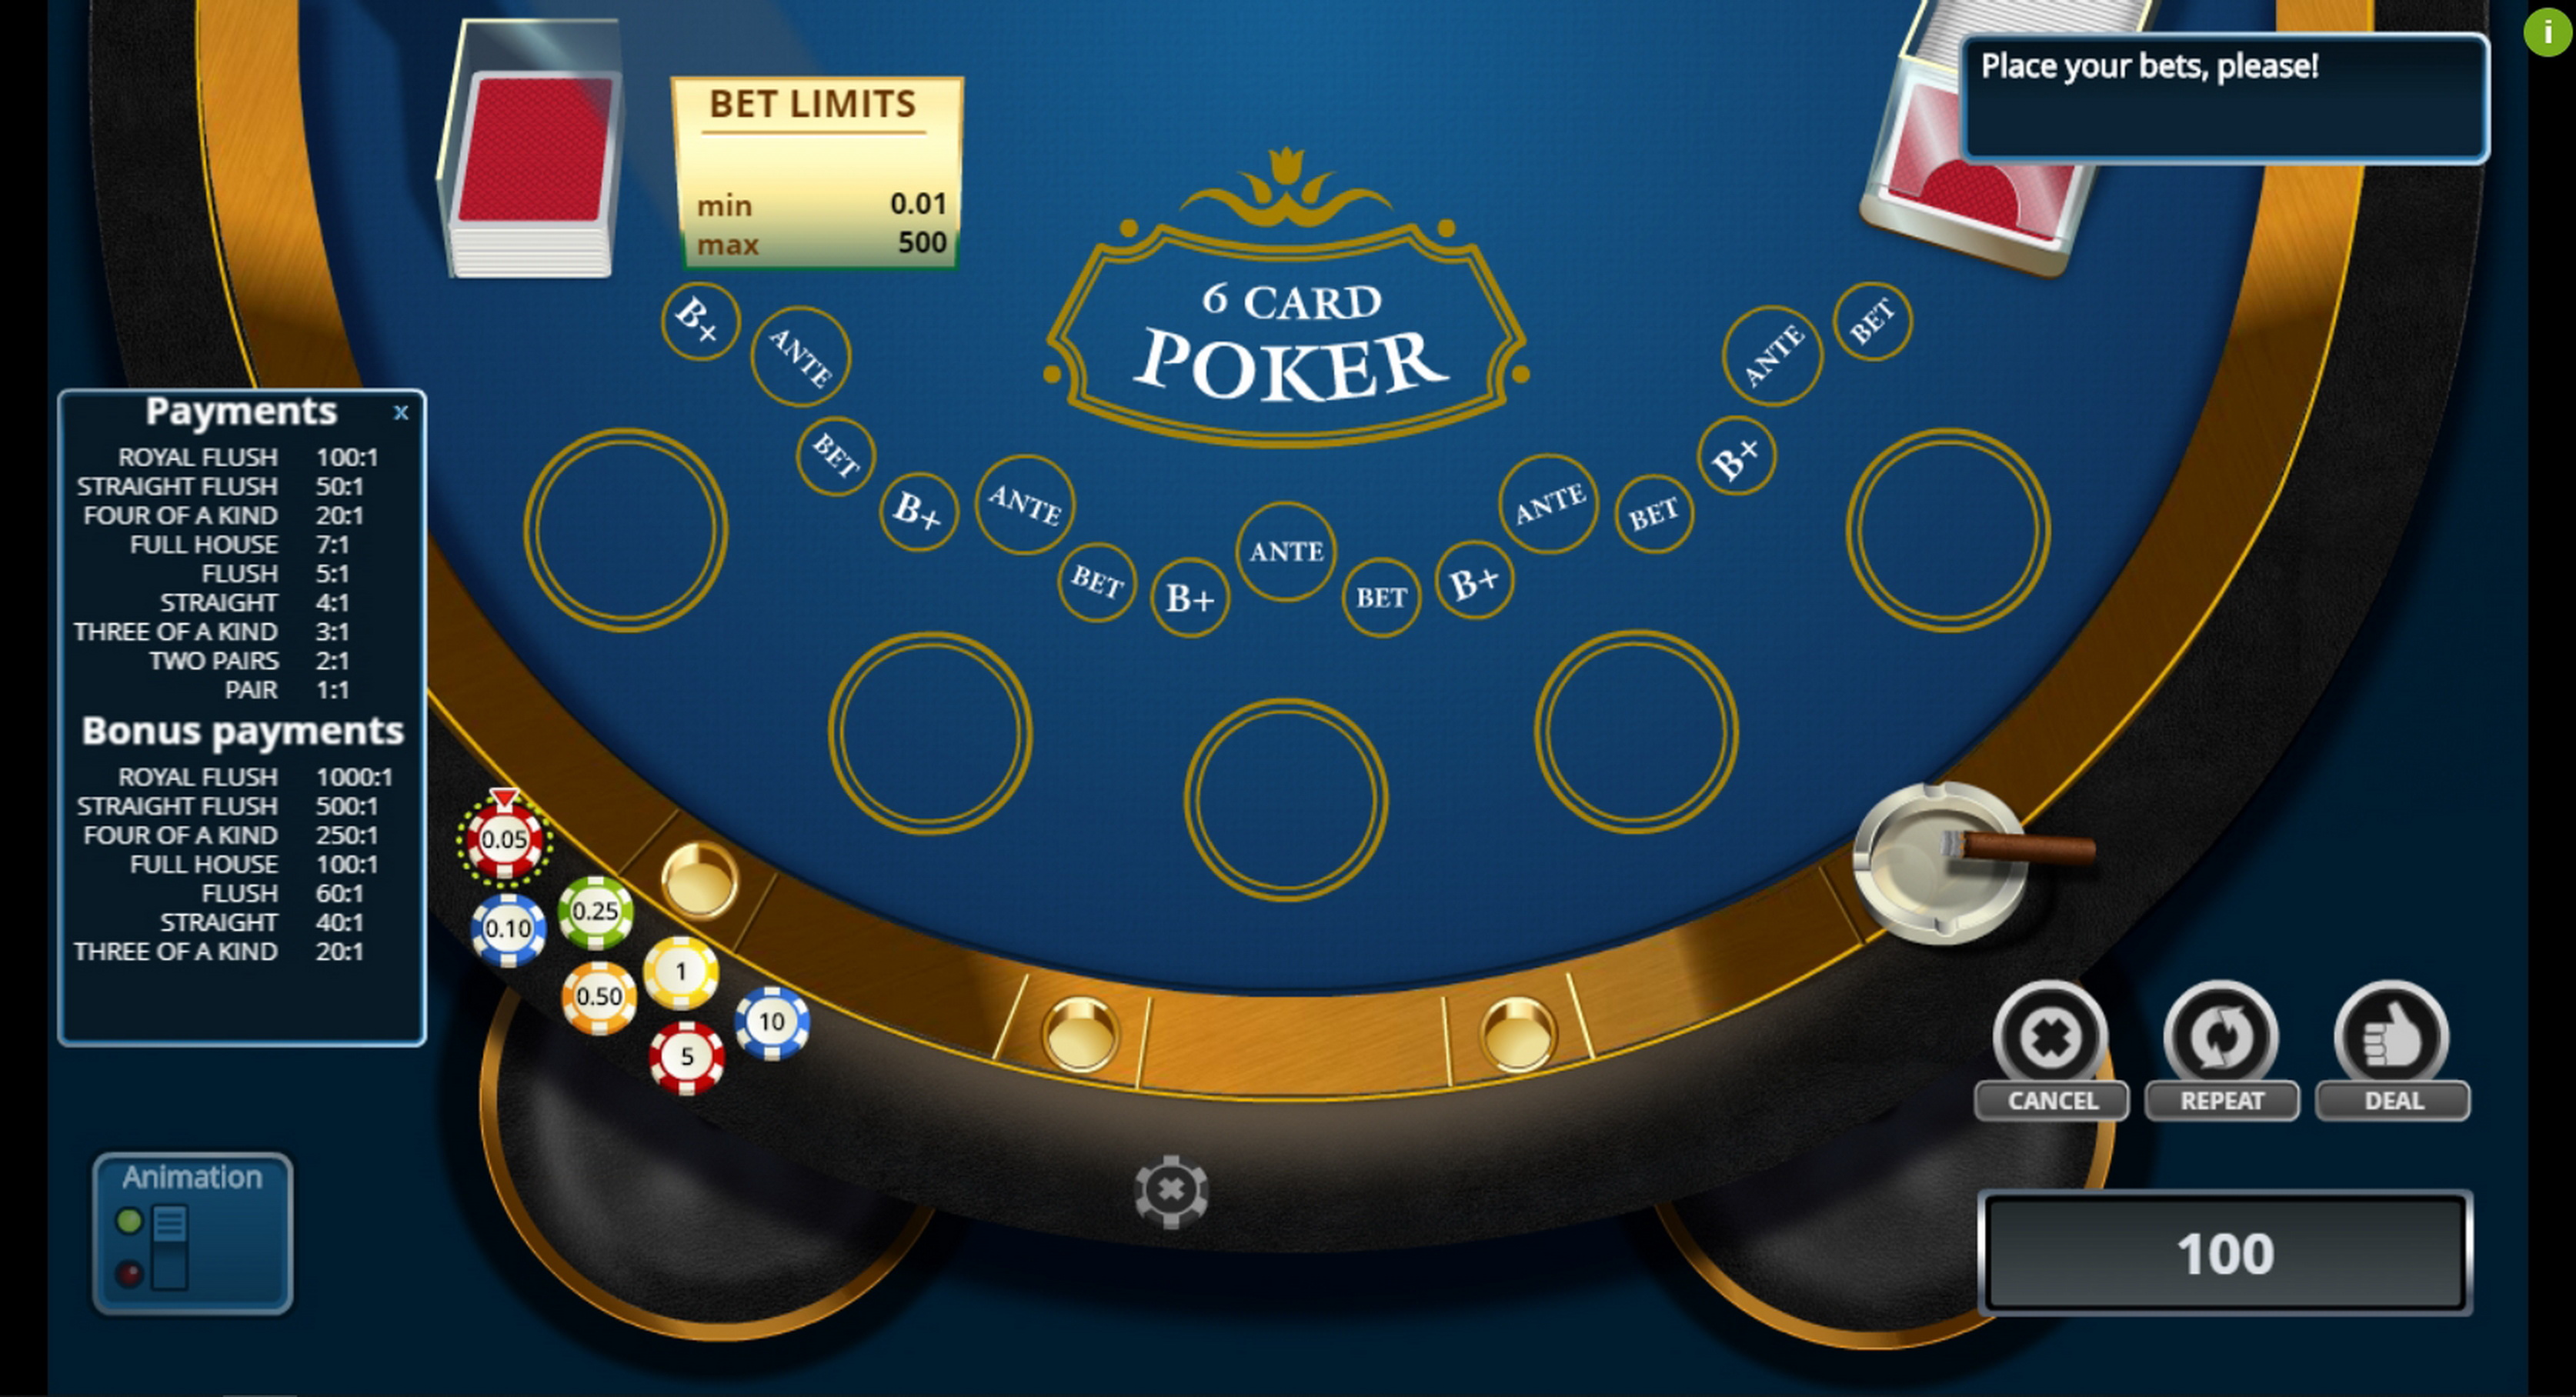 Info of 6 Card Poker Slot Game by Novomatic